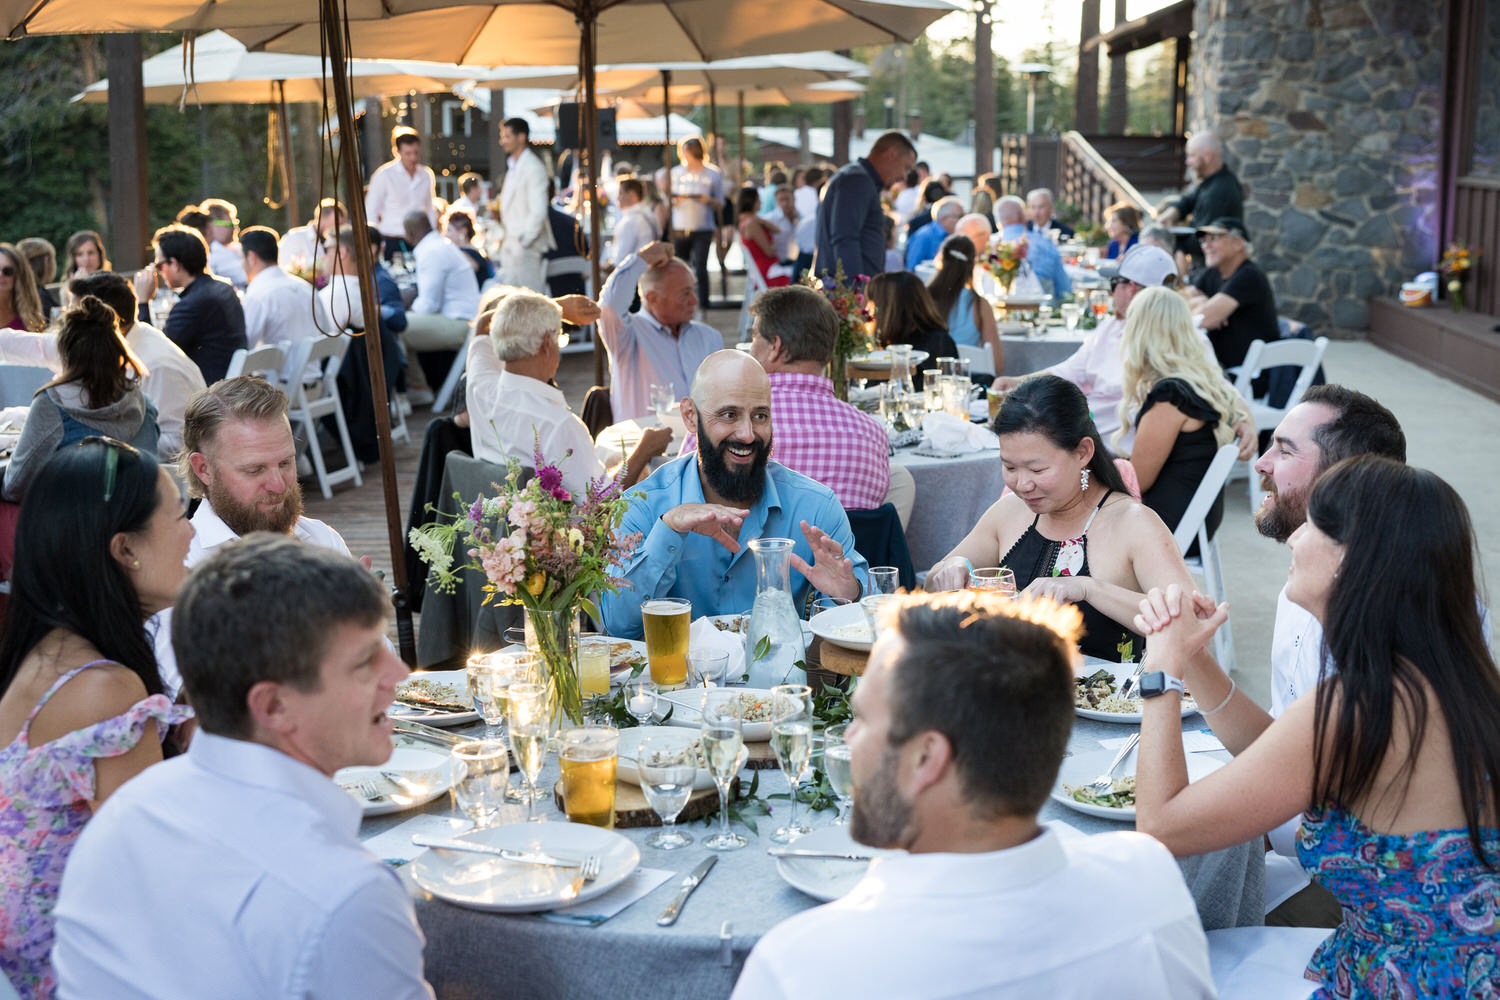 Guests enjoy outdoor dining at the Sugar Bowl Lodge during a warm summer evening.